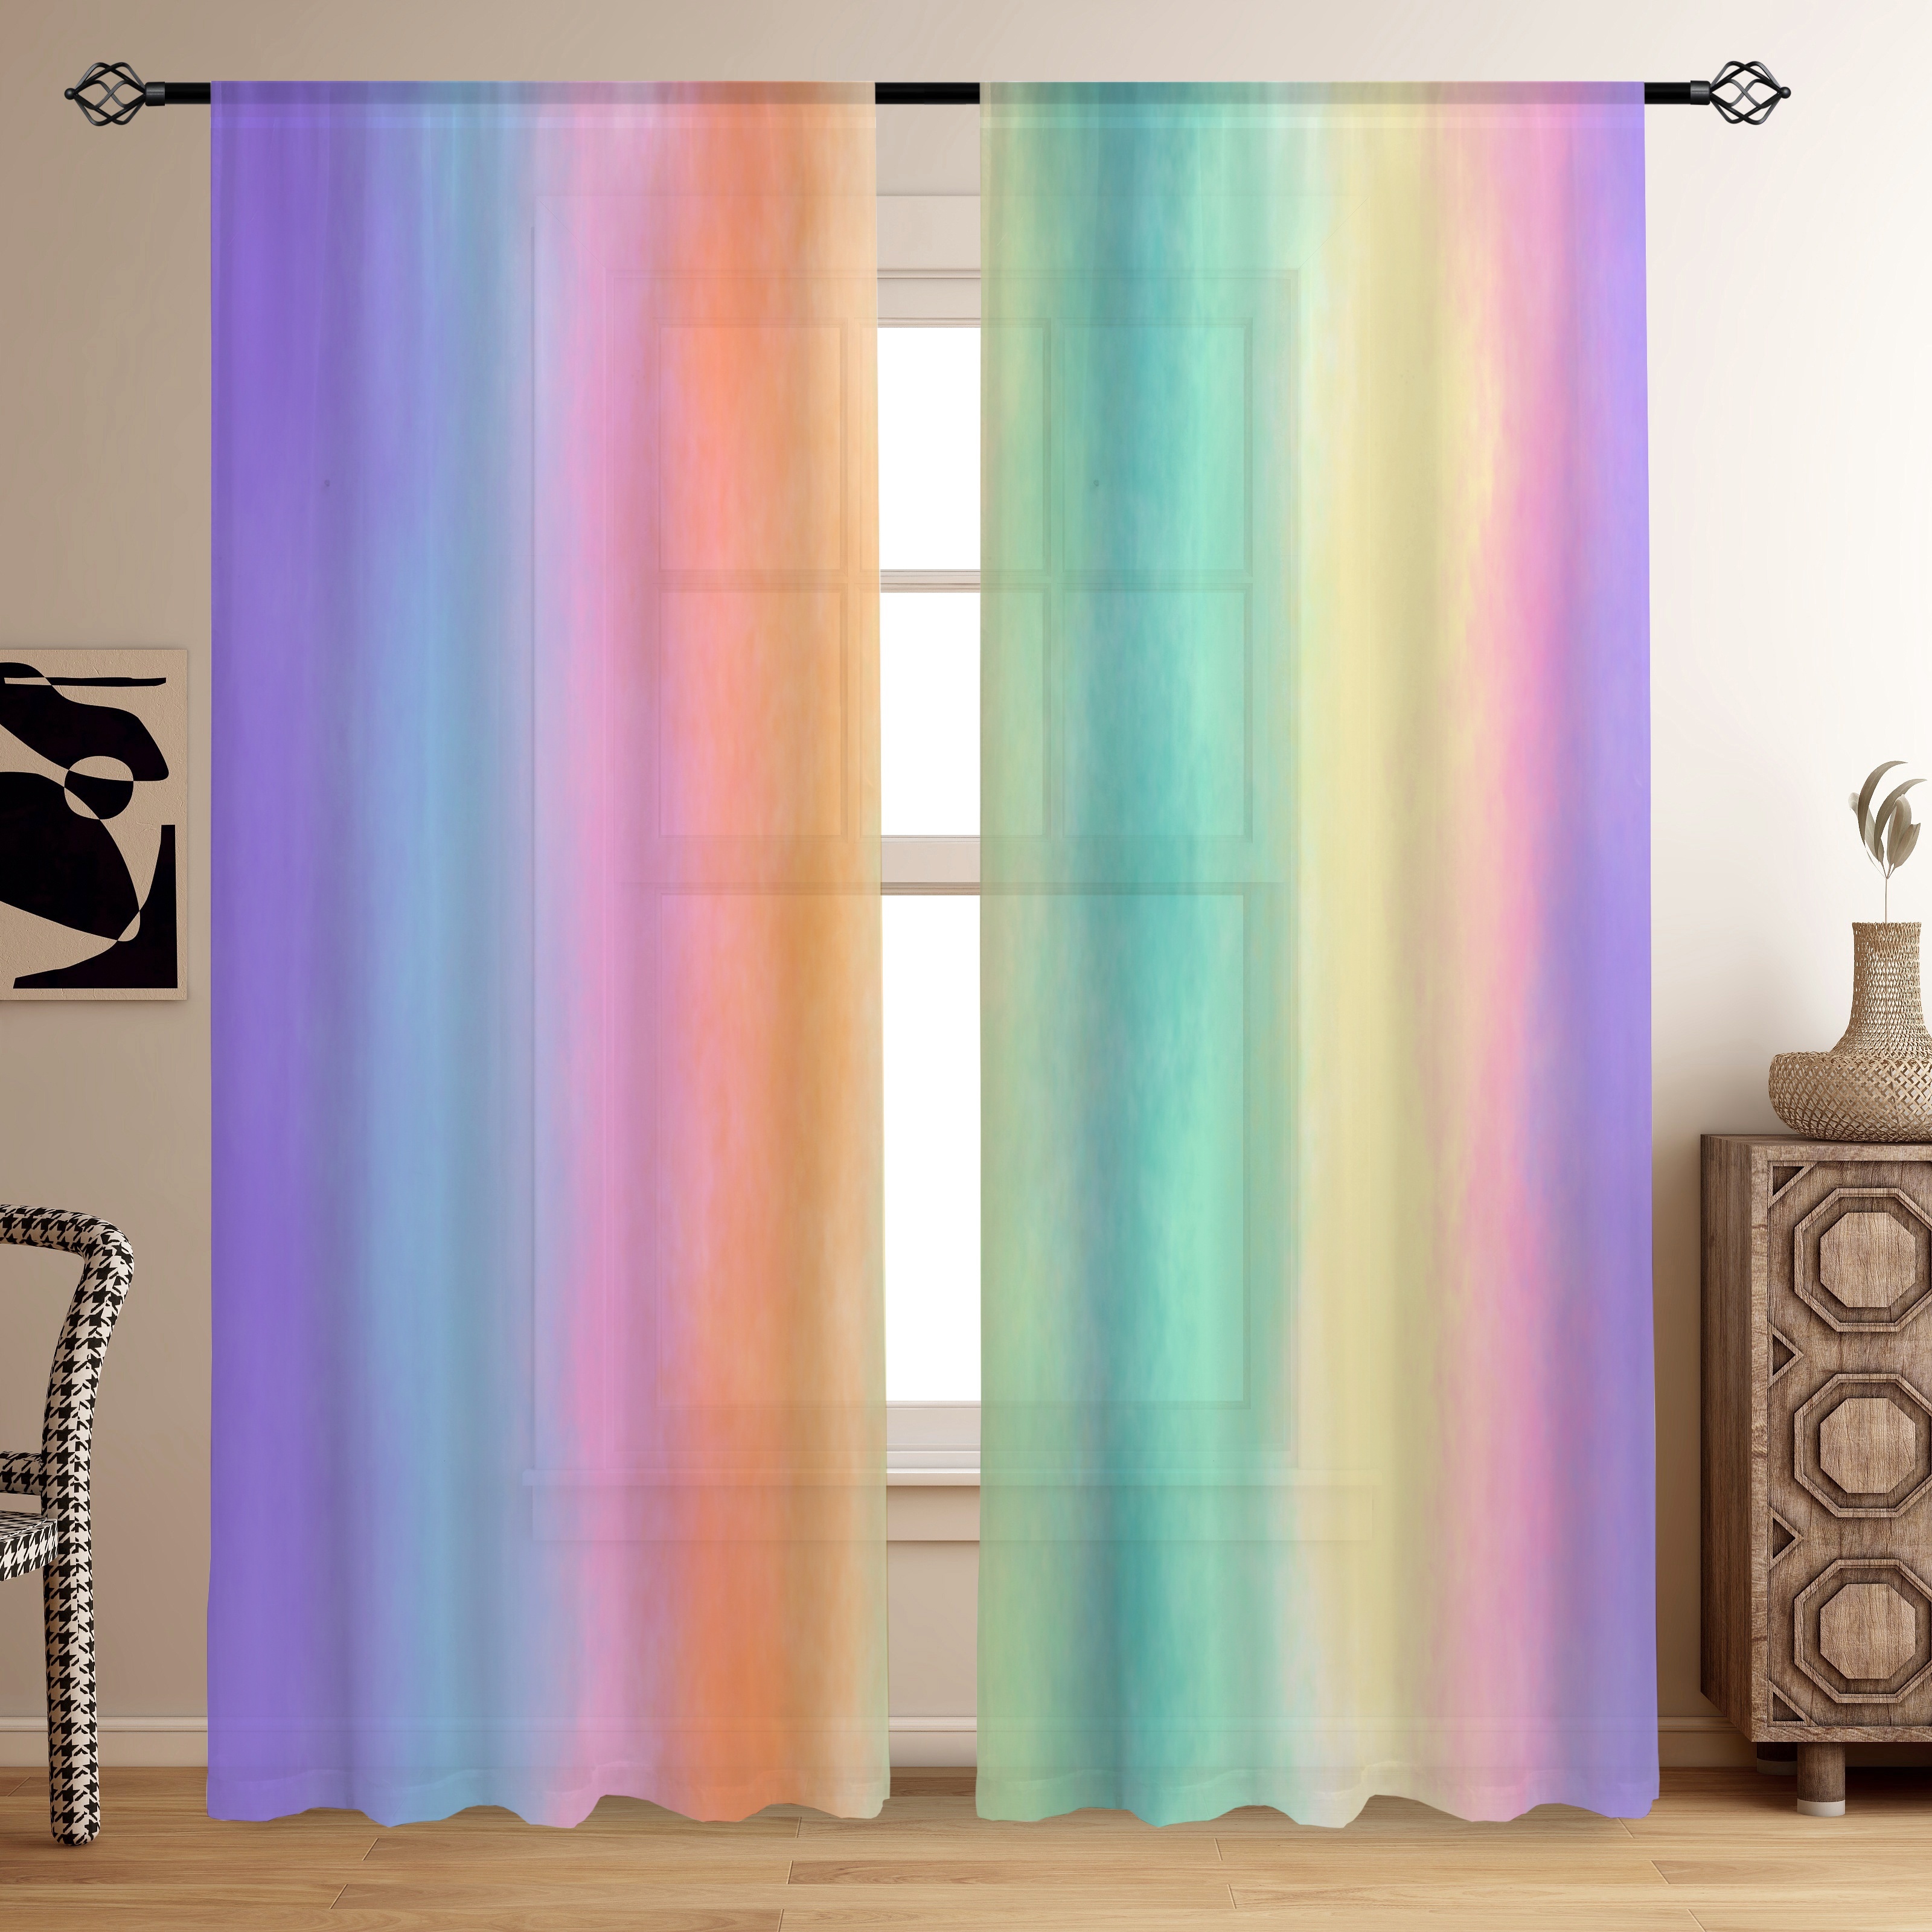 2 Panels, Vertical Gradient Curtain Semi-transparent Curtains, Sunshade And Privacy Protection For Living Room, Bedroom, And Room Home Decor